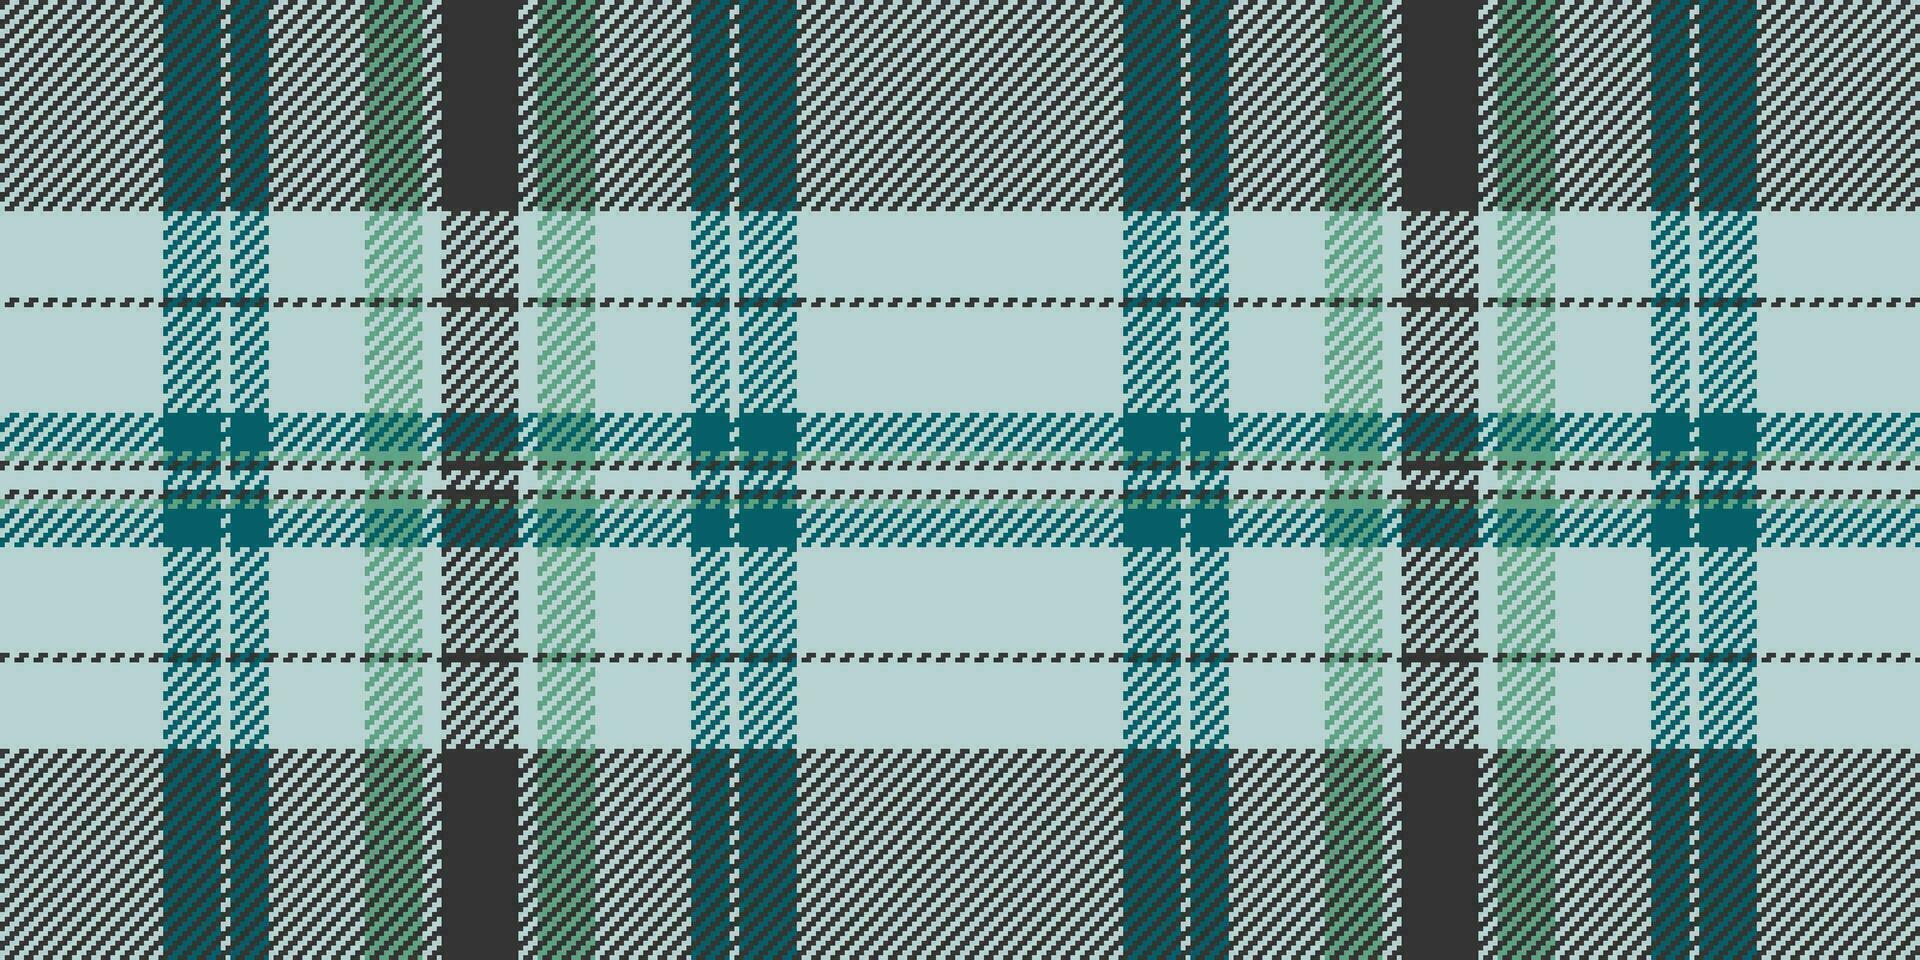 Creation pattern background check, folklore texture seamless plaid. Fashioned vector fabric tartan textile in light and grey colors.